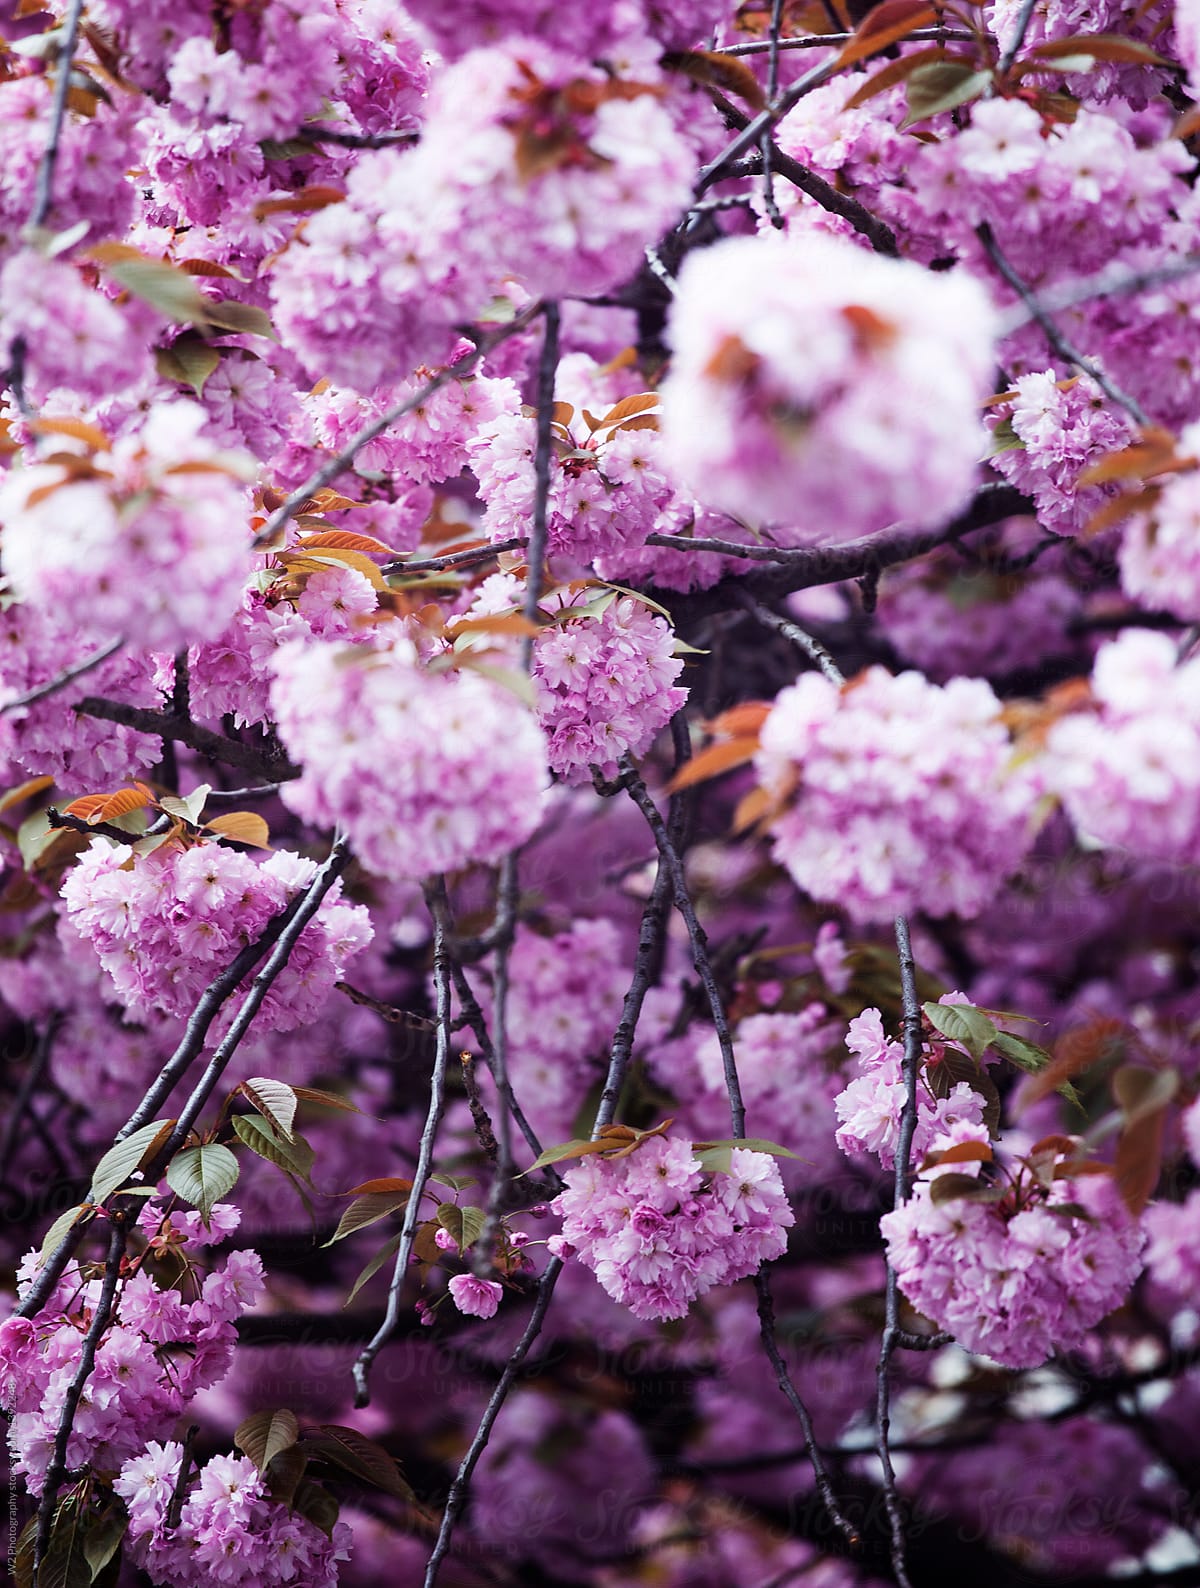 Pink flowers blooming on a tree in springtime.